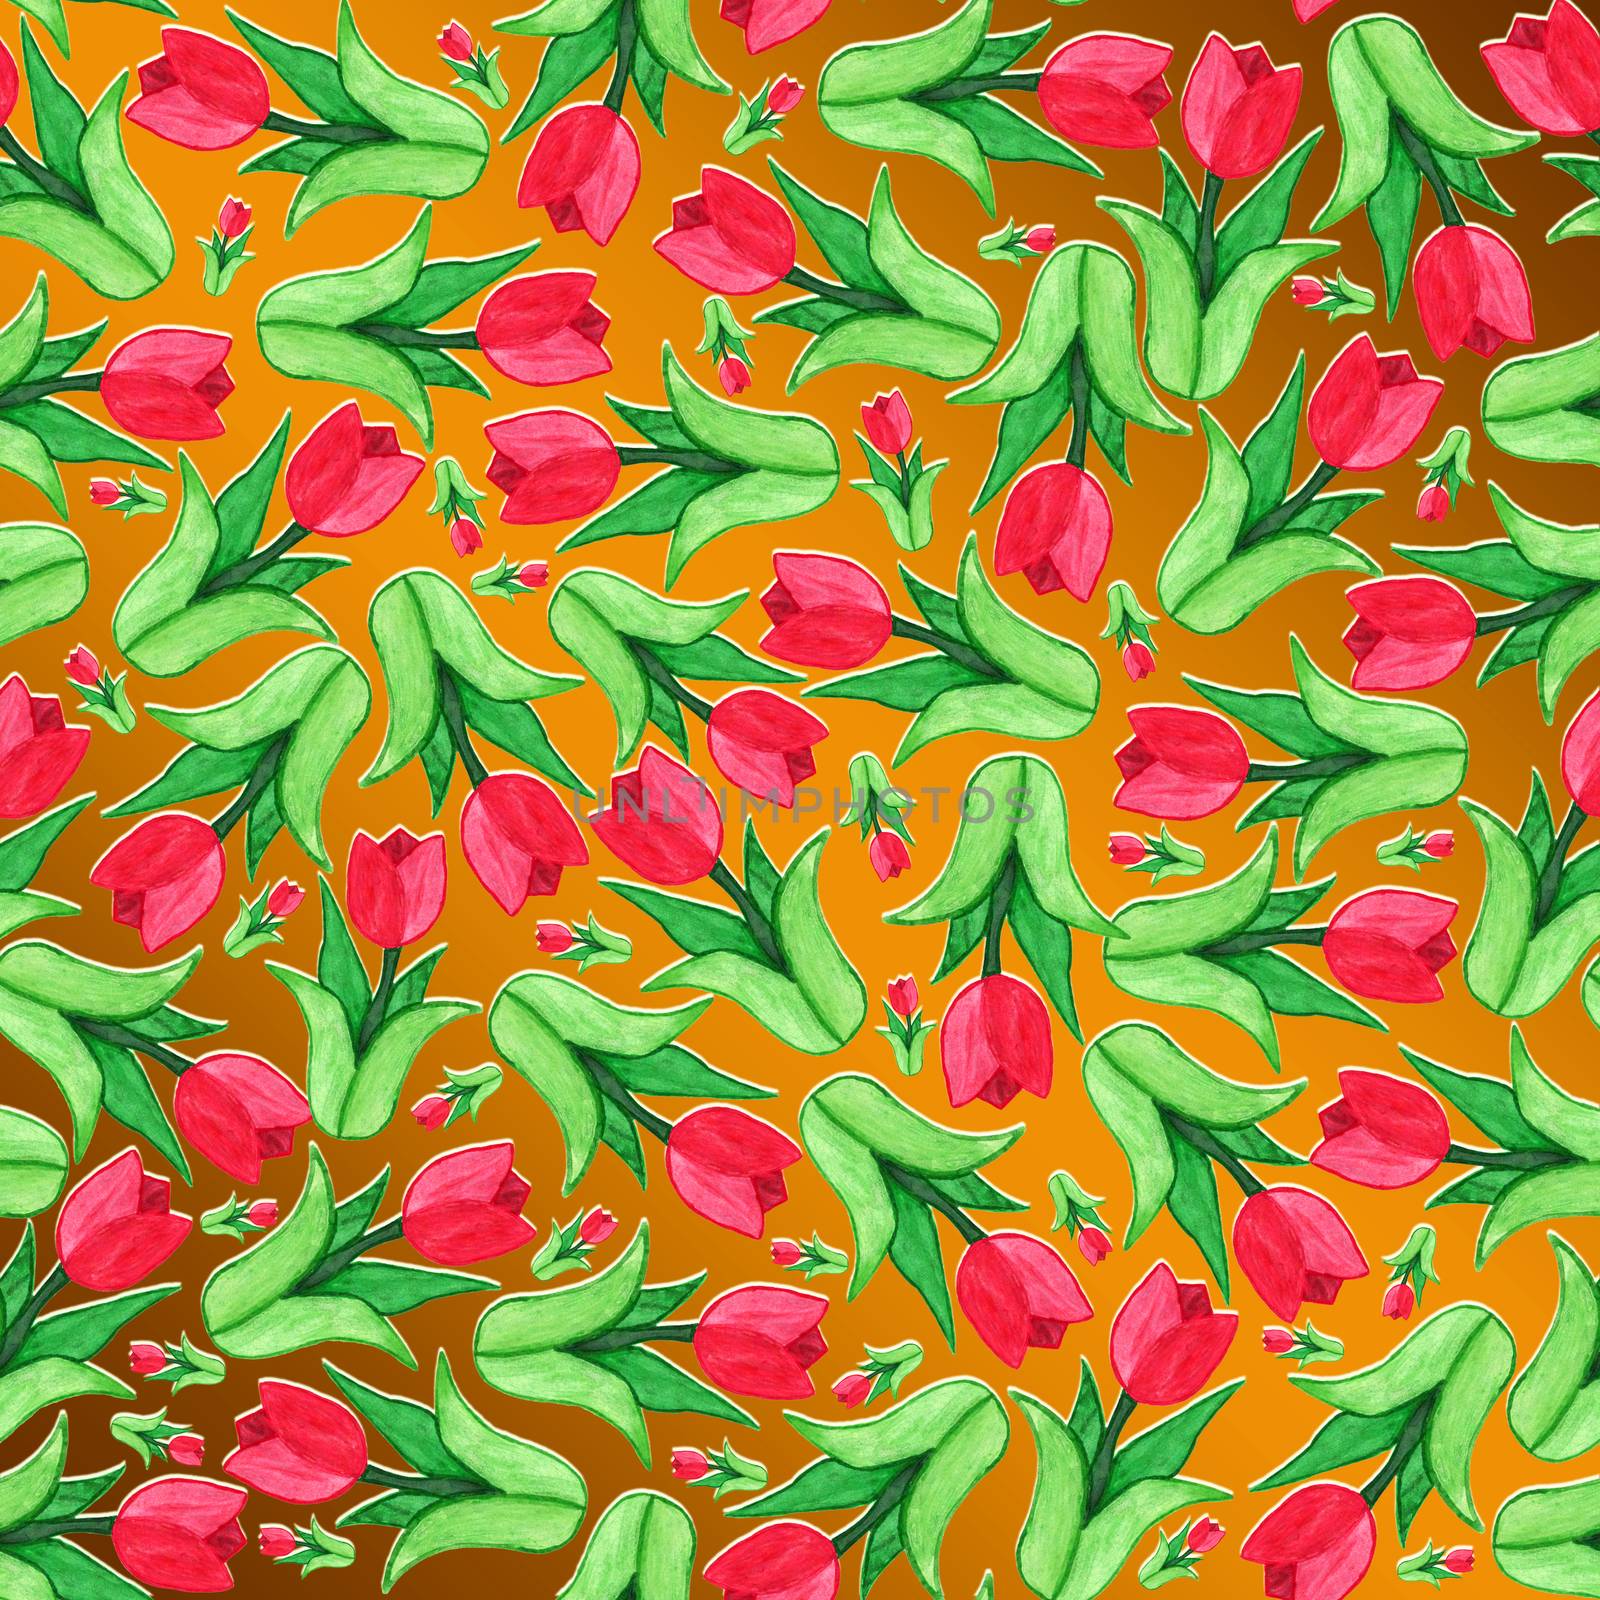 Seamless floral pattern with tulips, watercolor paints by Grommik